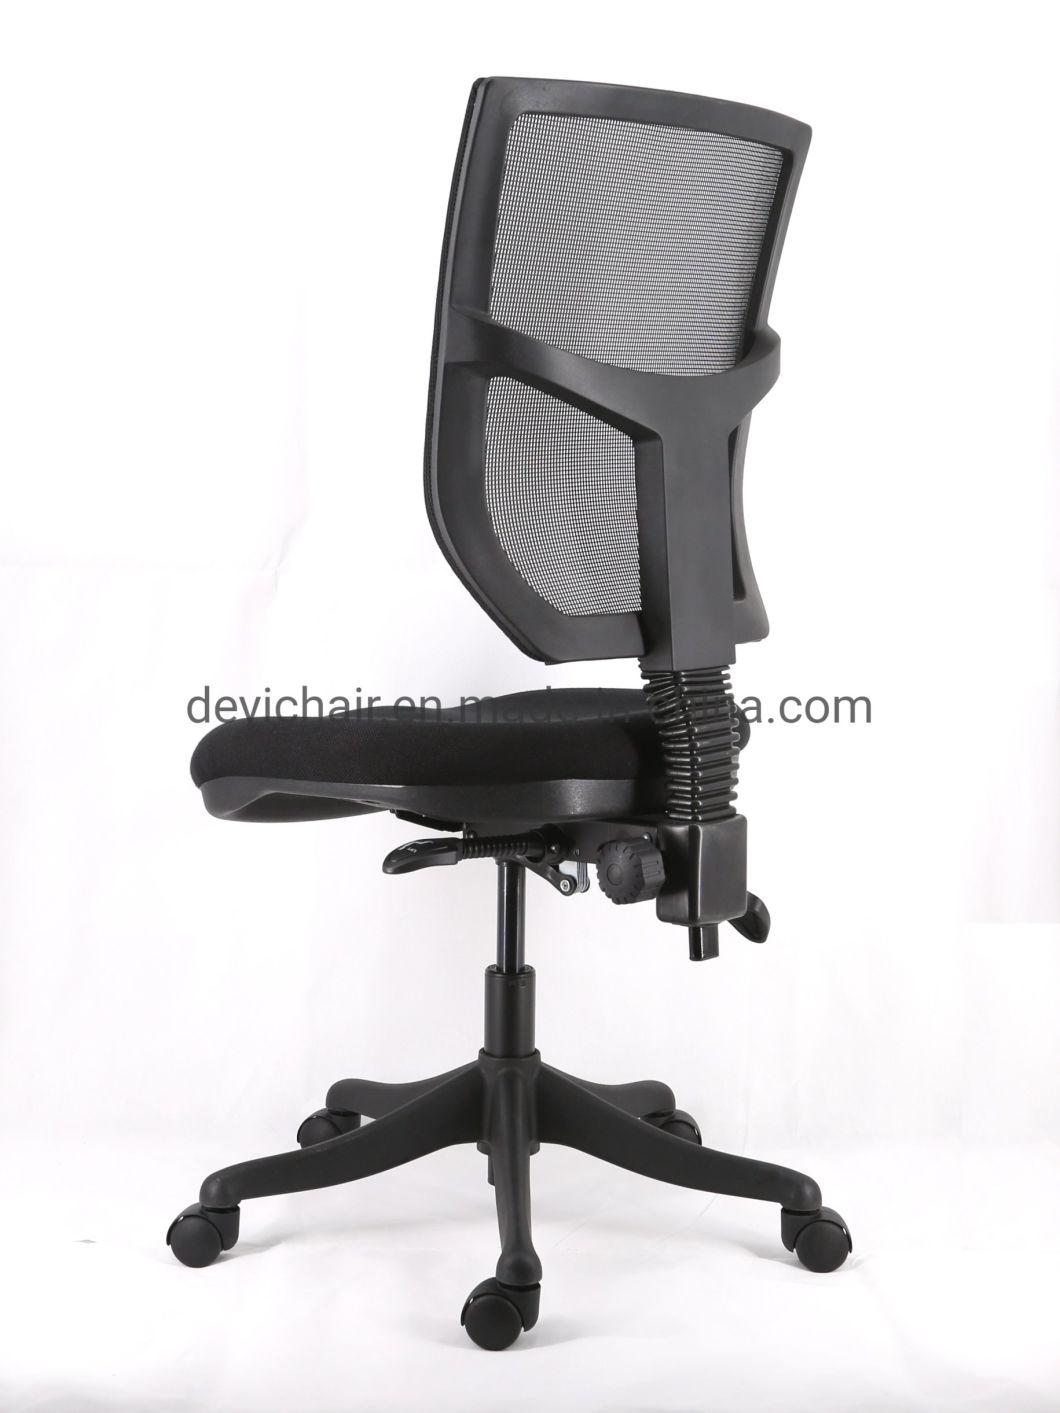 Arm Available Back Support Available Funcional Mechanism Nylon Base PU Caster Mesh Computer Chair